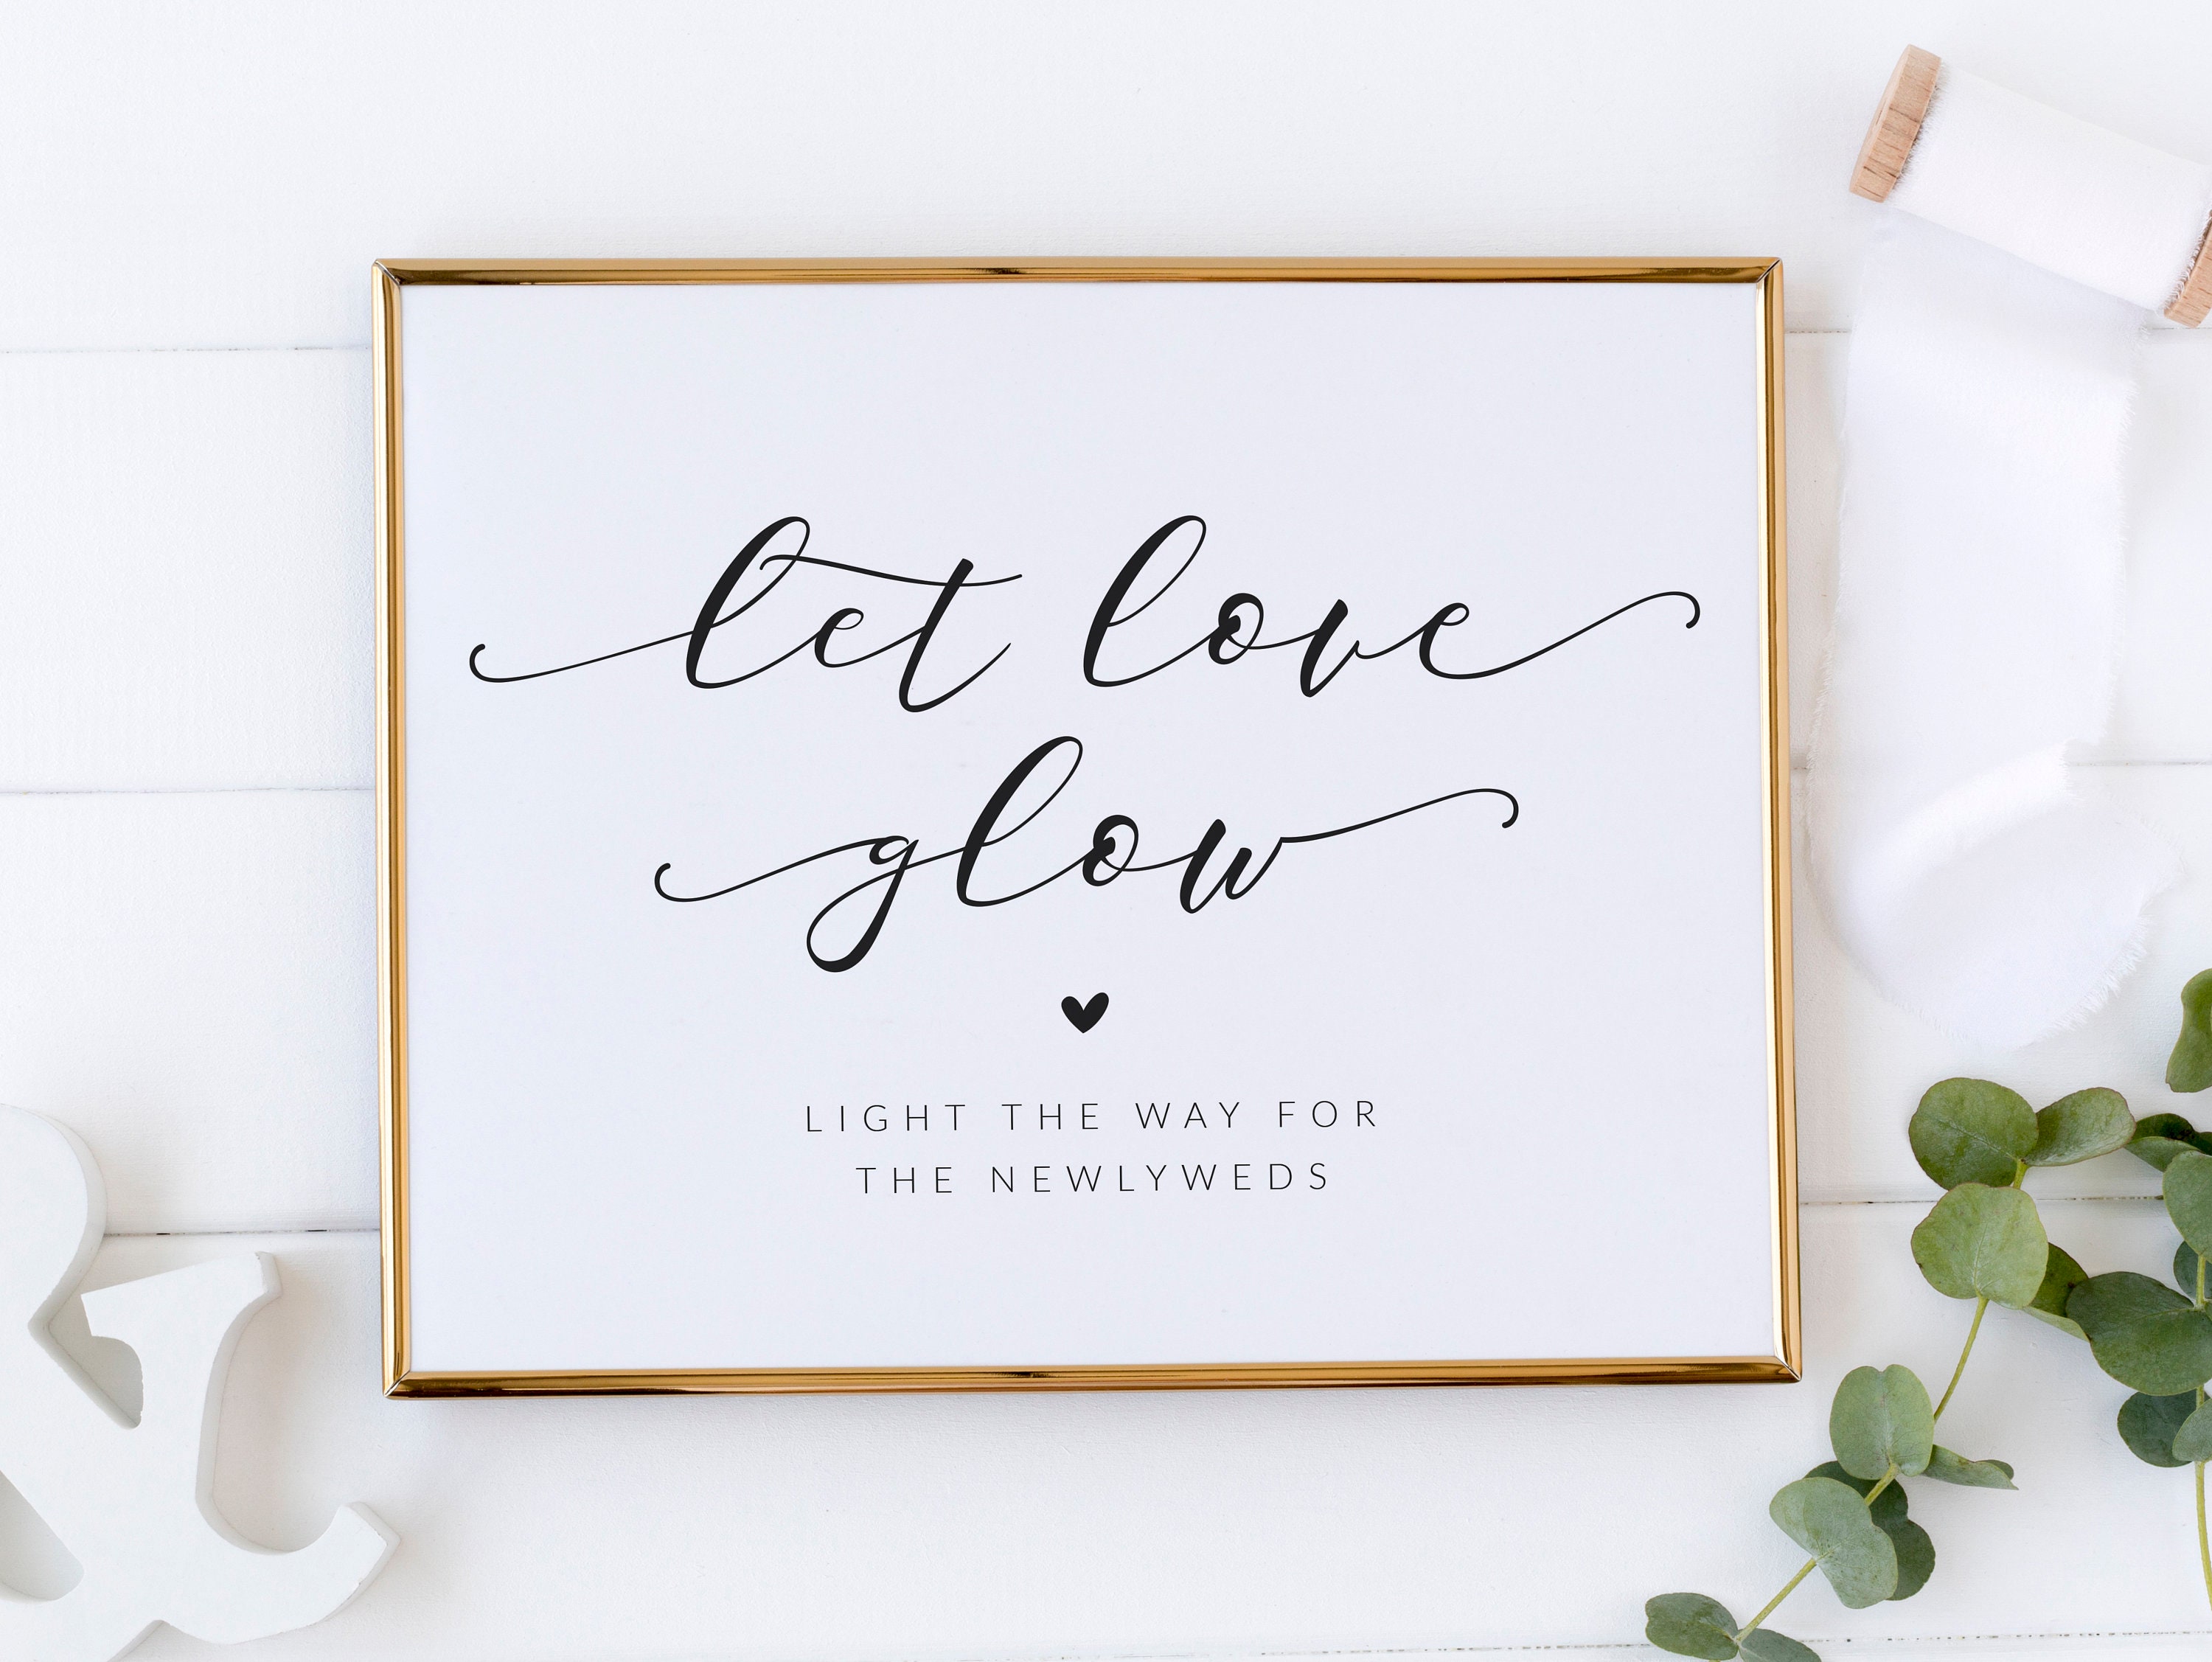 Let Love Glow Sign, Sparklers Sign, Glow Stick Wedding Sign Template, Glow  Sticks Send off Template, Wedding Glow Sticks Sign Celine -  Sweden